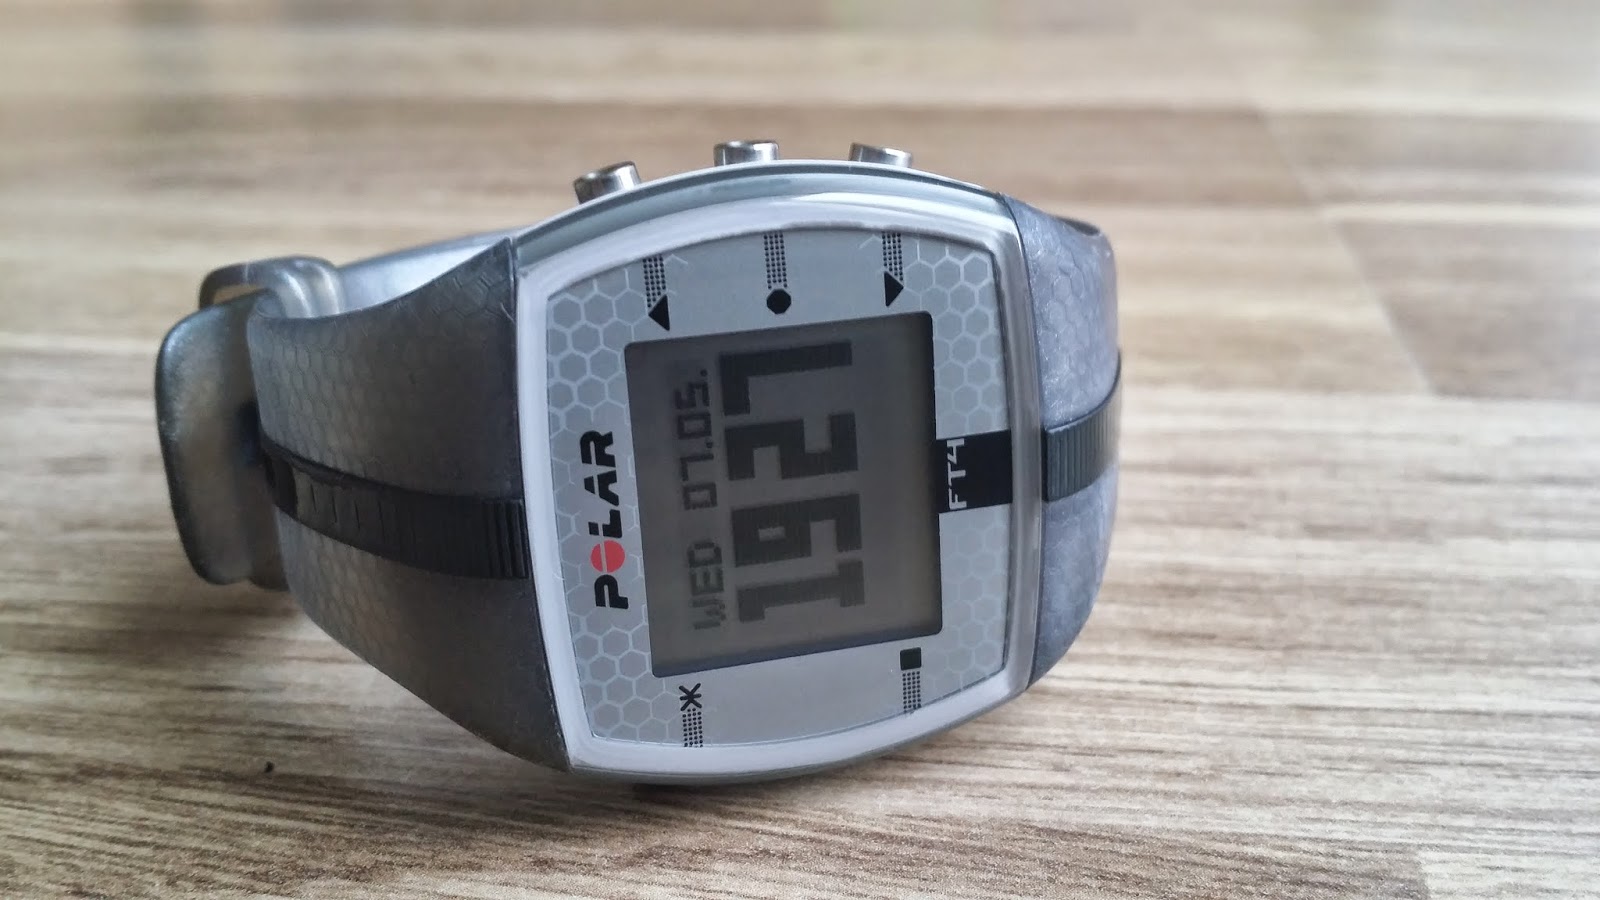 Polar FT4 Silver Heart Rate Monitor Exercise Watch with Polar Strap | eBay